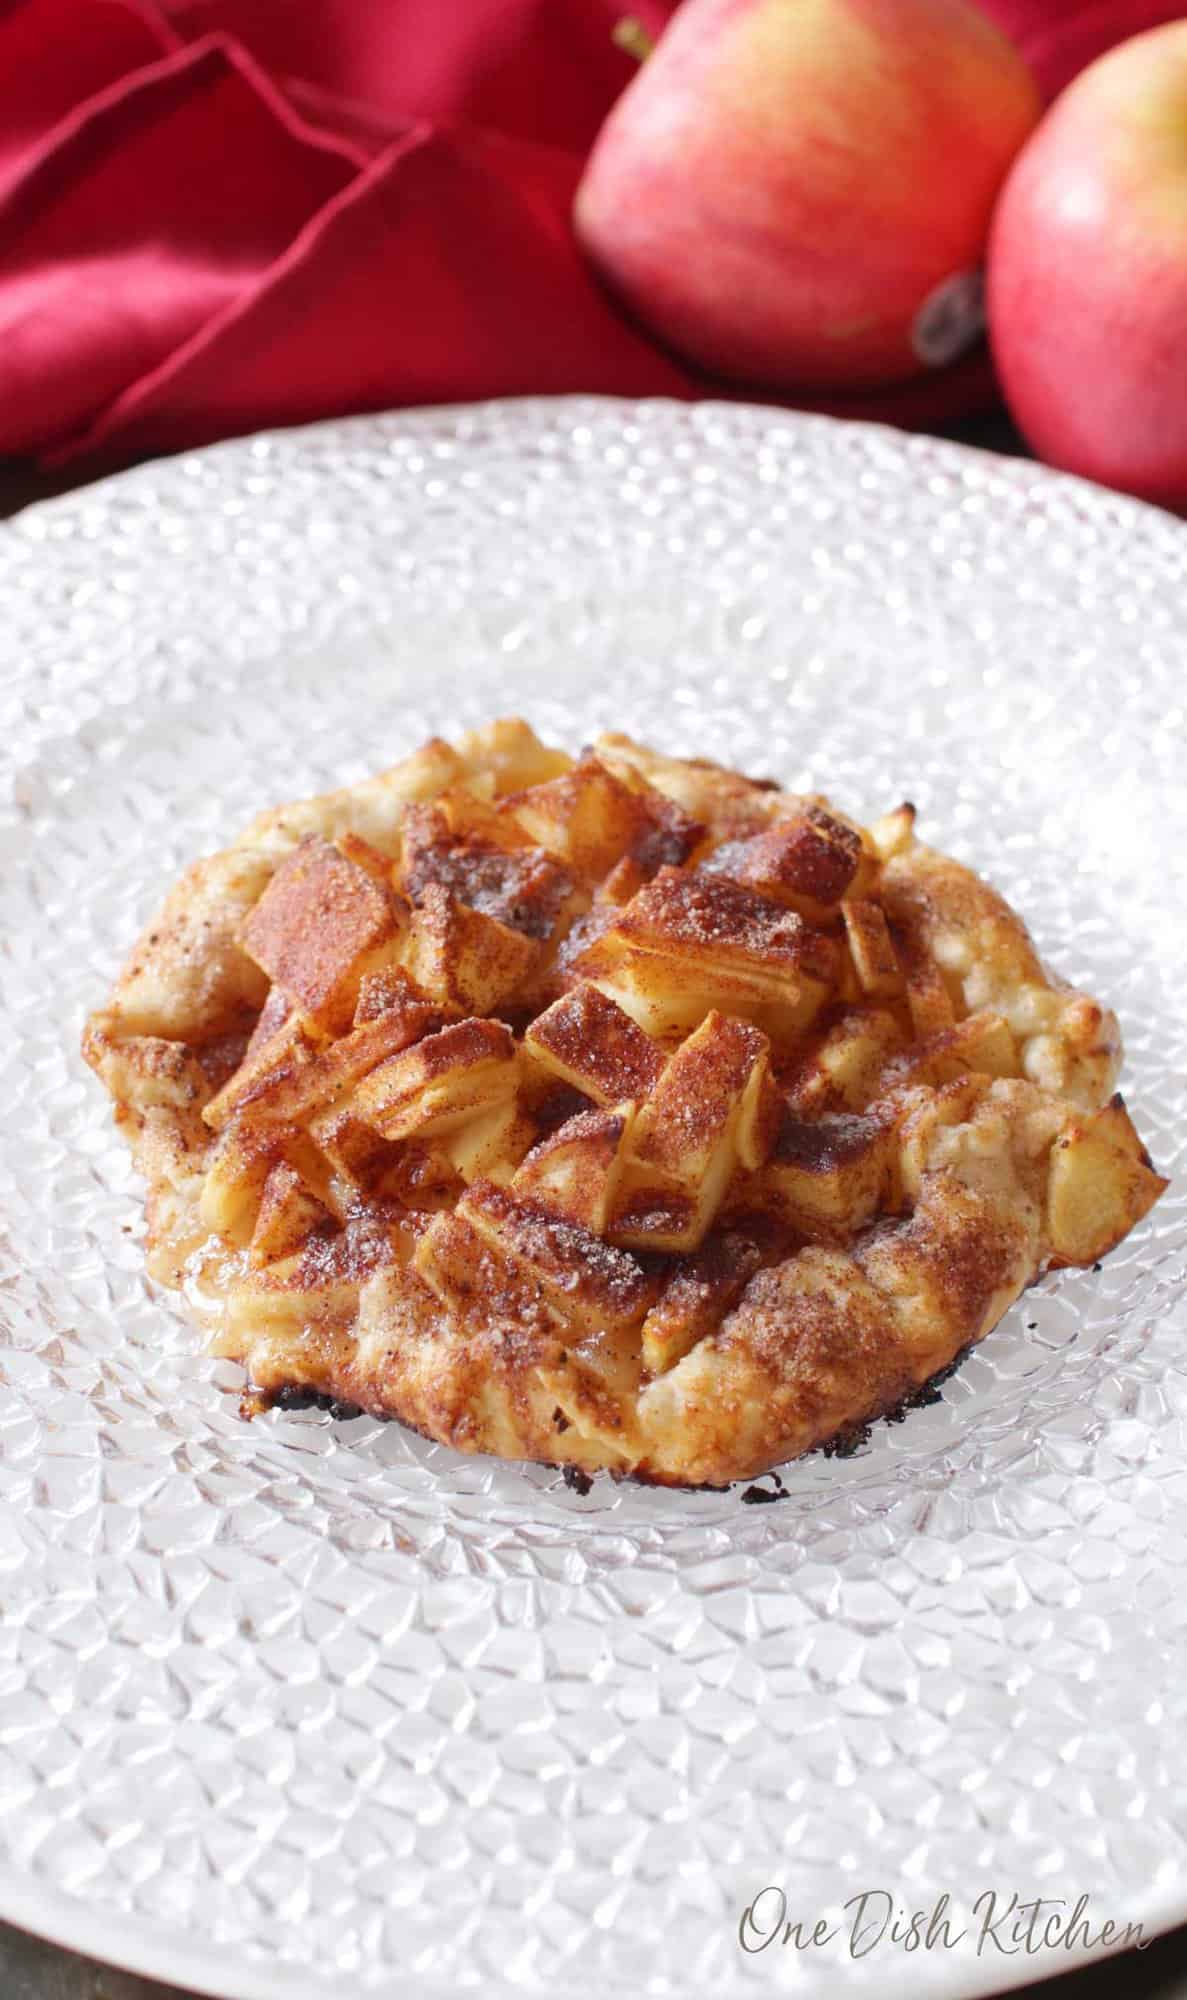 An apple galette topped with cinnamon and sugar plated with apples and a red cloth napkin in the background.